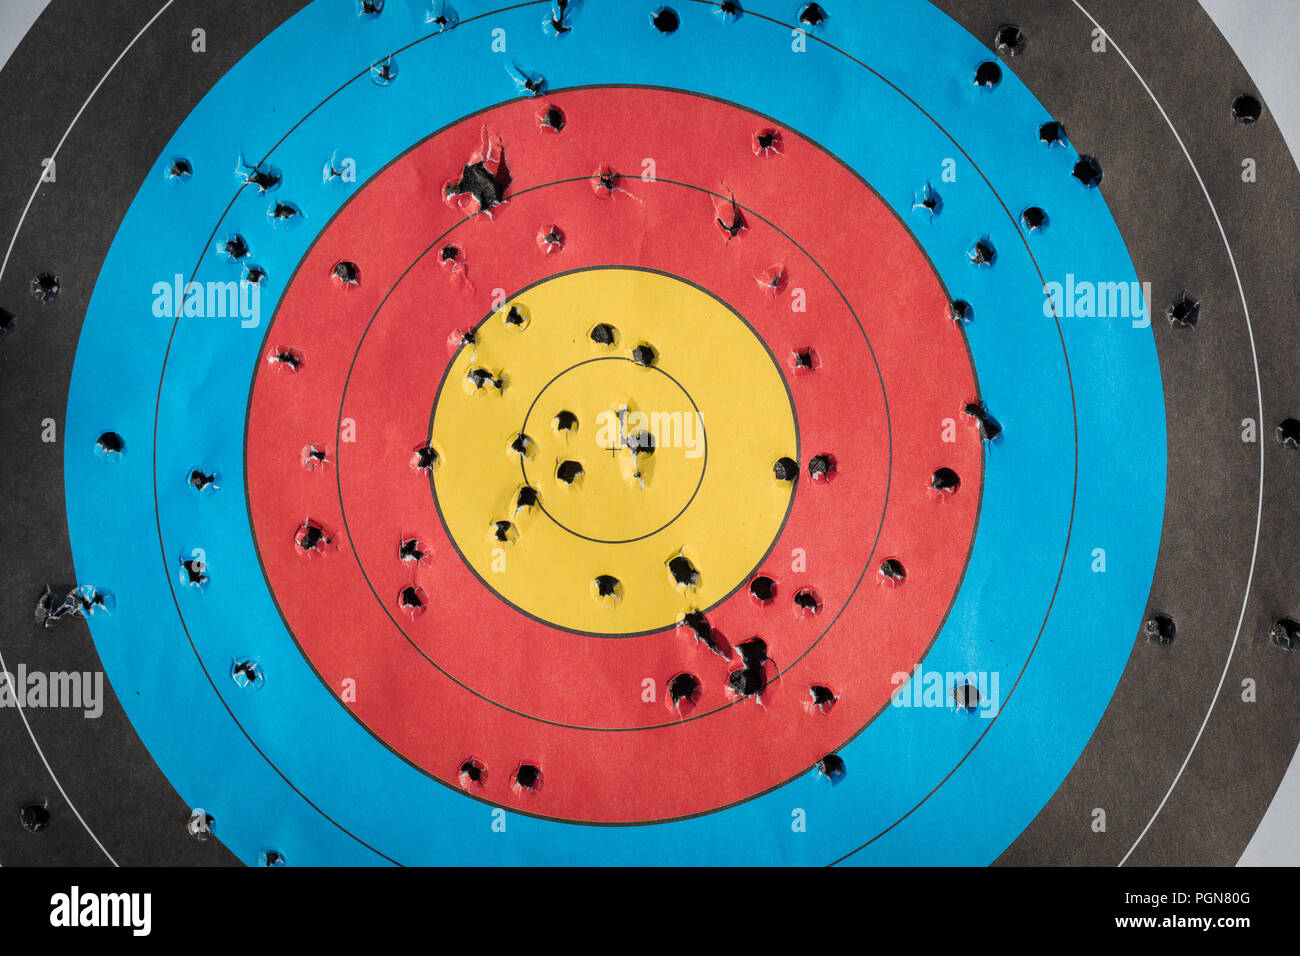 Practice target used for shooting with bullet holes in it, toned Stock Photo